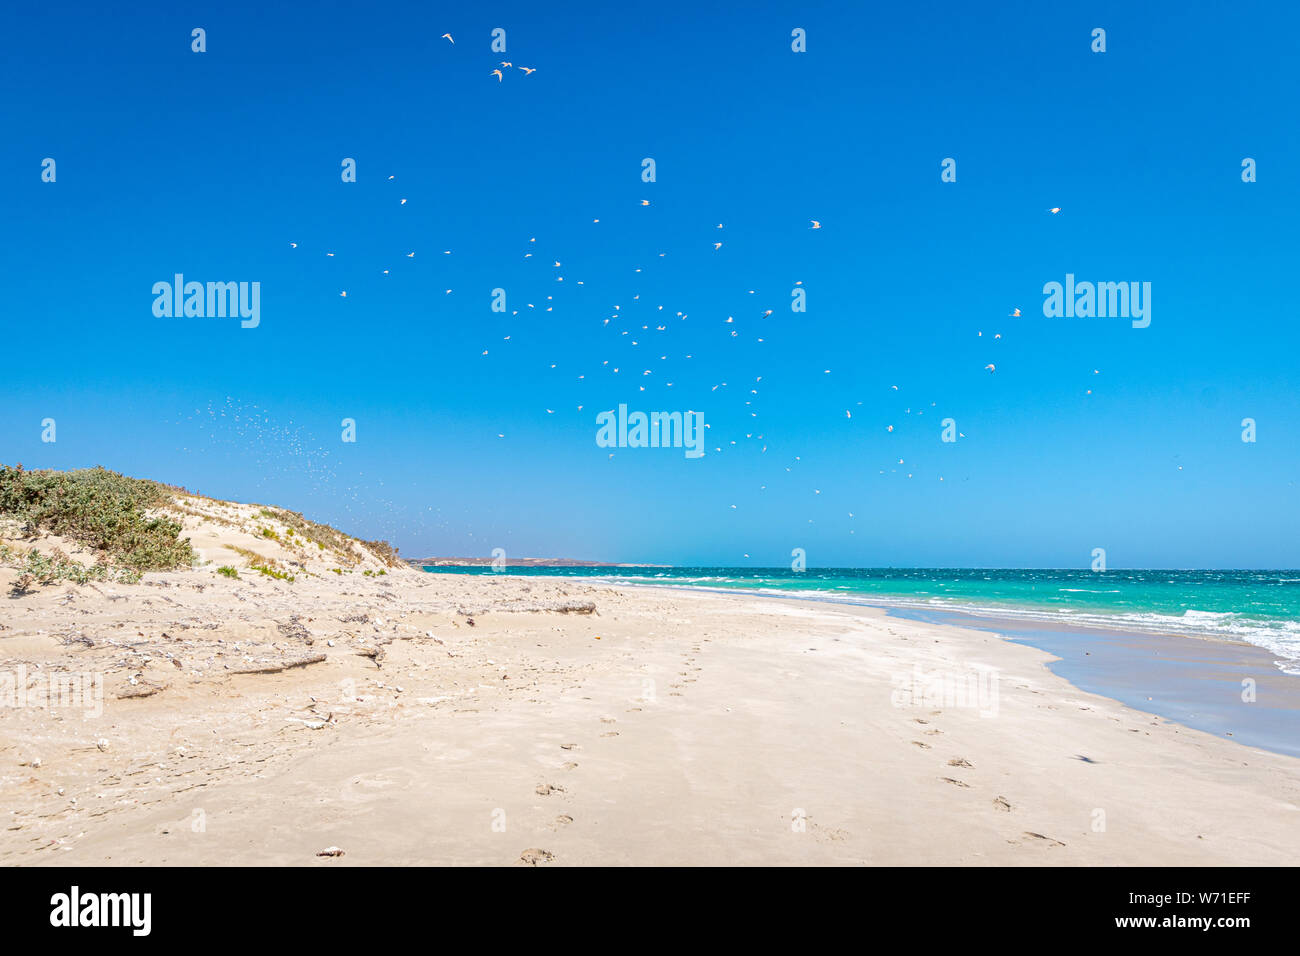 Beach of Coral Bay swarms of seagulls flying in the air Stock Photo